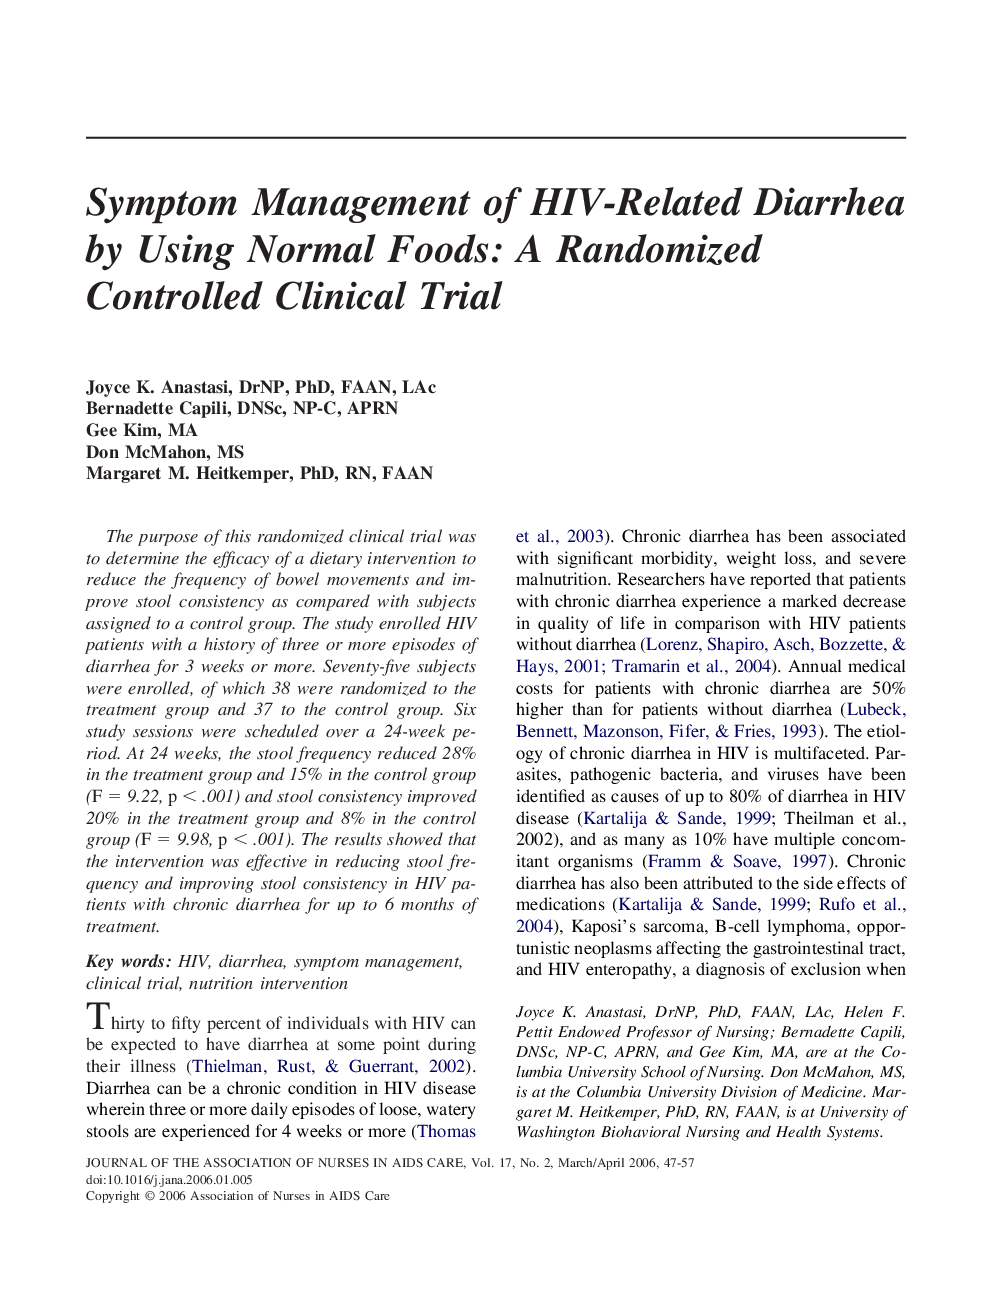 Symptom Management of HIV-Related Diarrhea by Using Normal Foods: A Randomized Controlled Clinical Trial